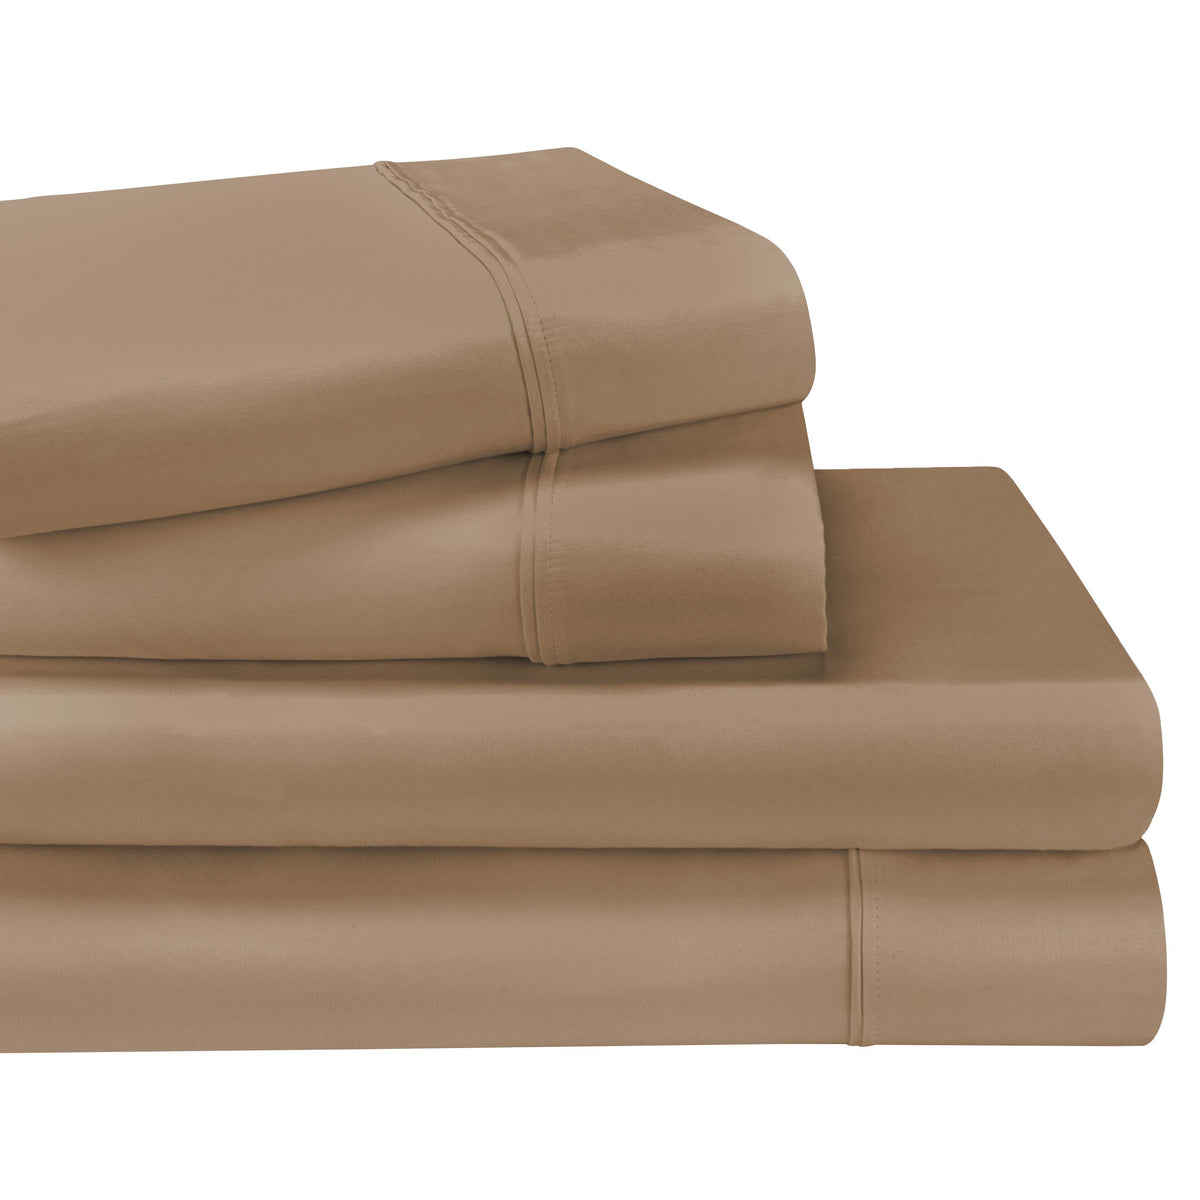 Egyptian Cotton 1200 Thread Count Eco-Friendly Solid Sheet Set